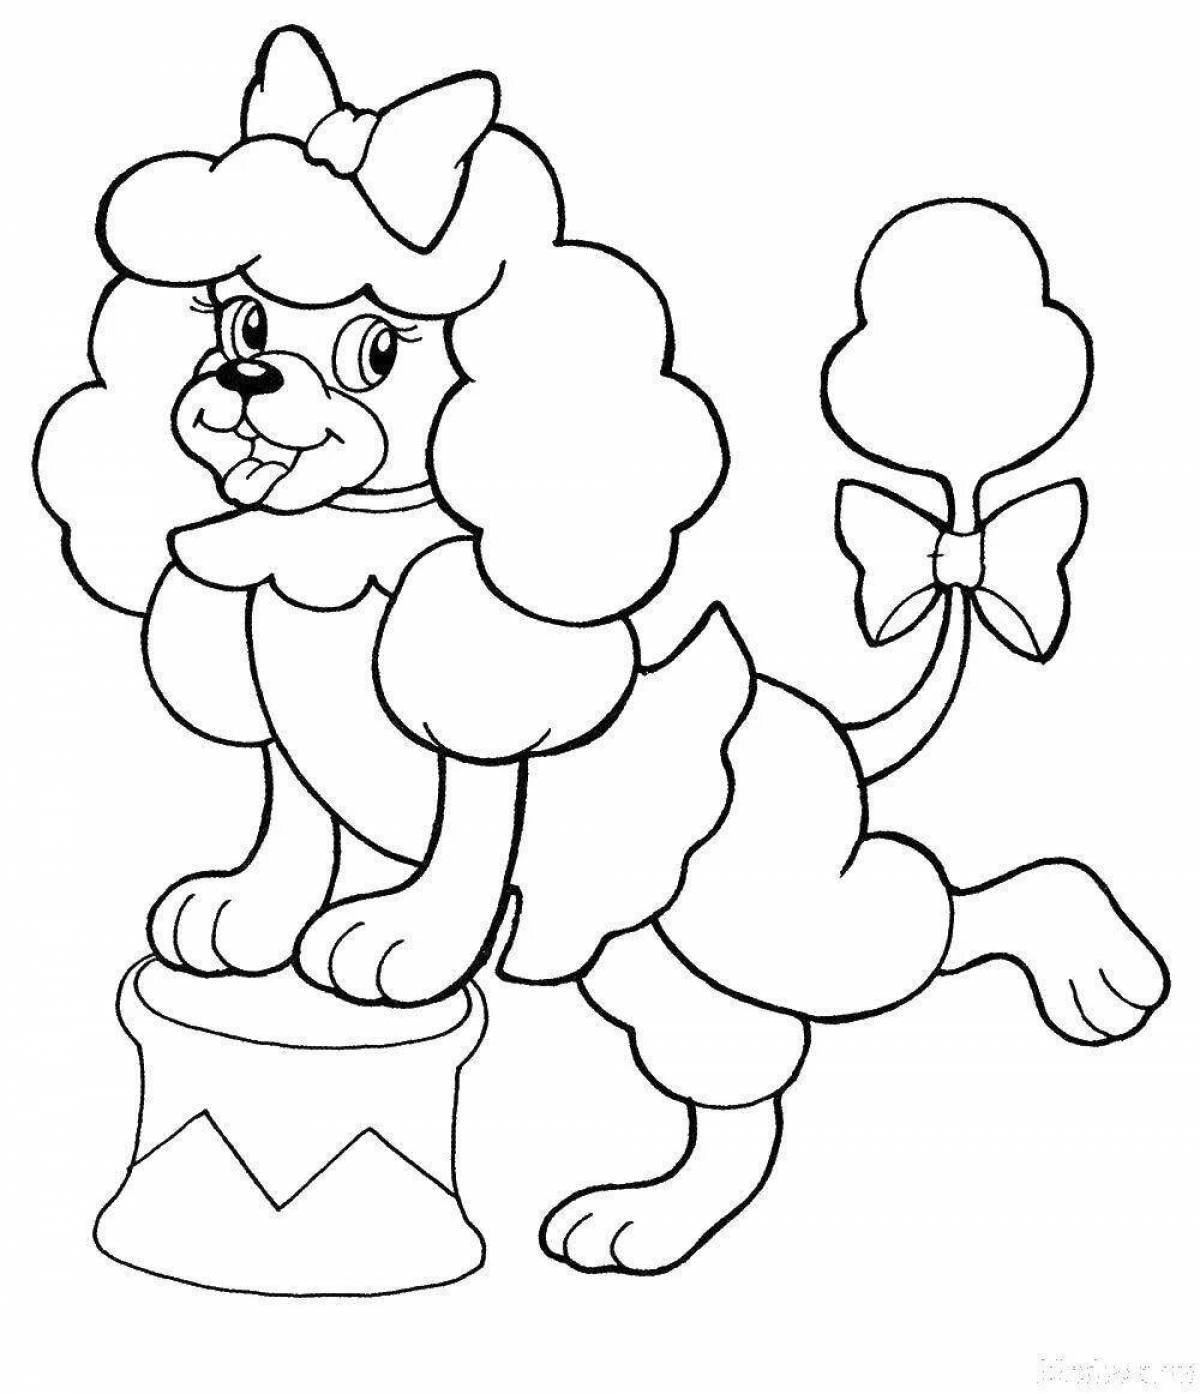 Playful poodle coloring page for kids